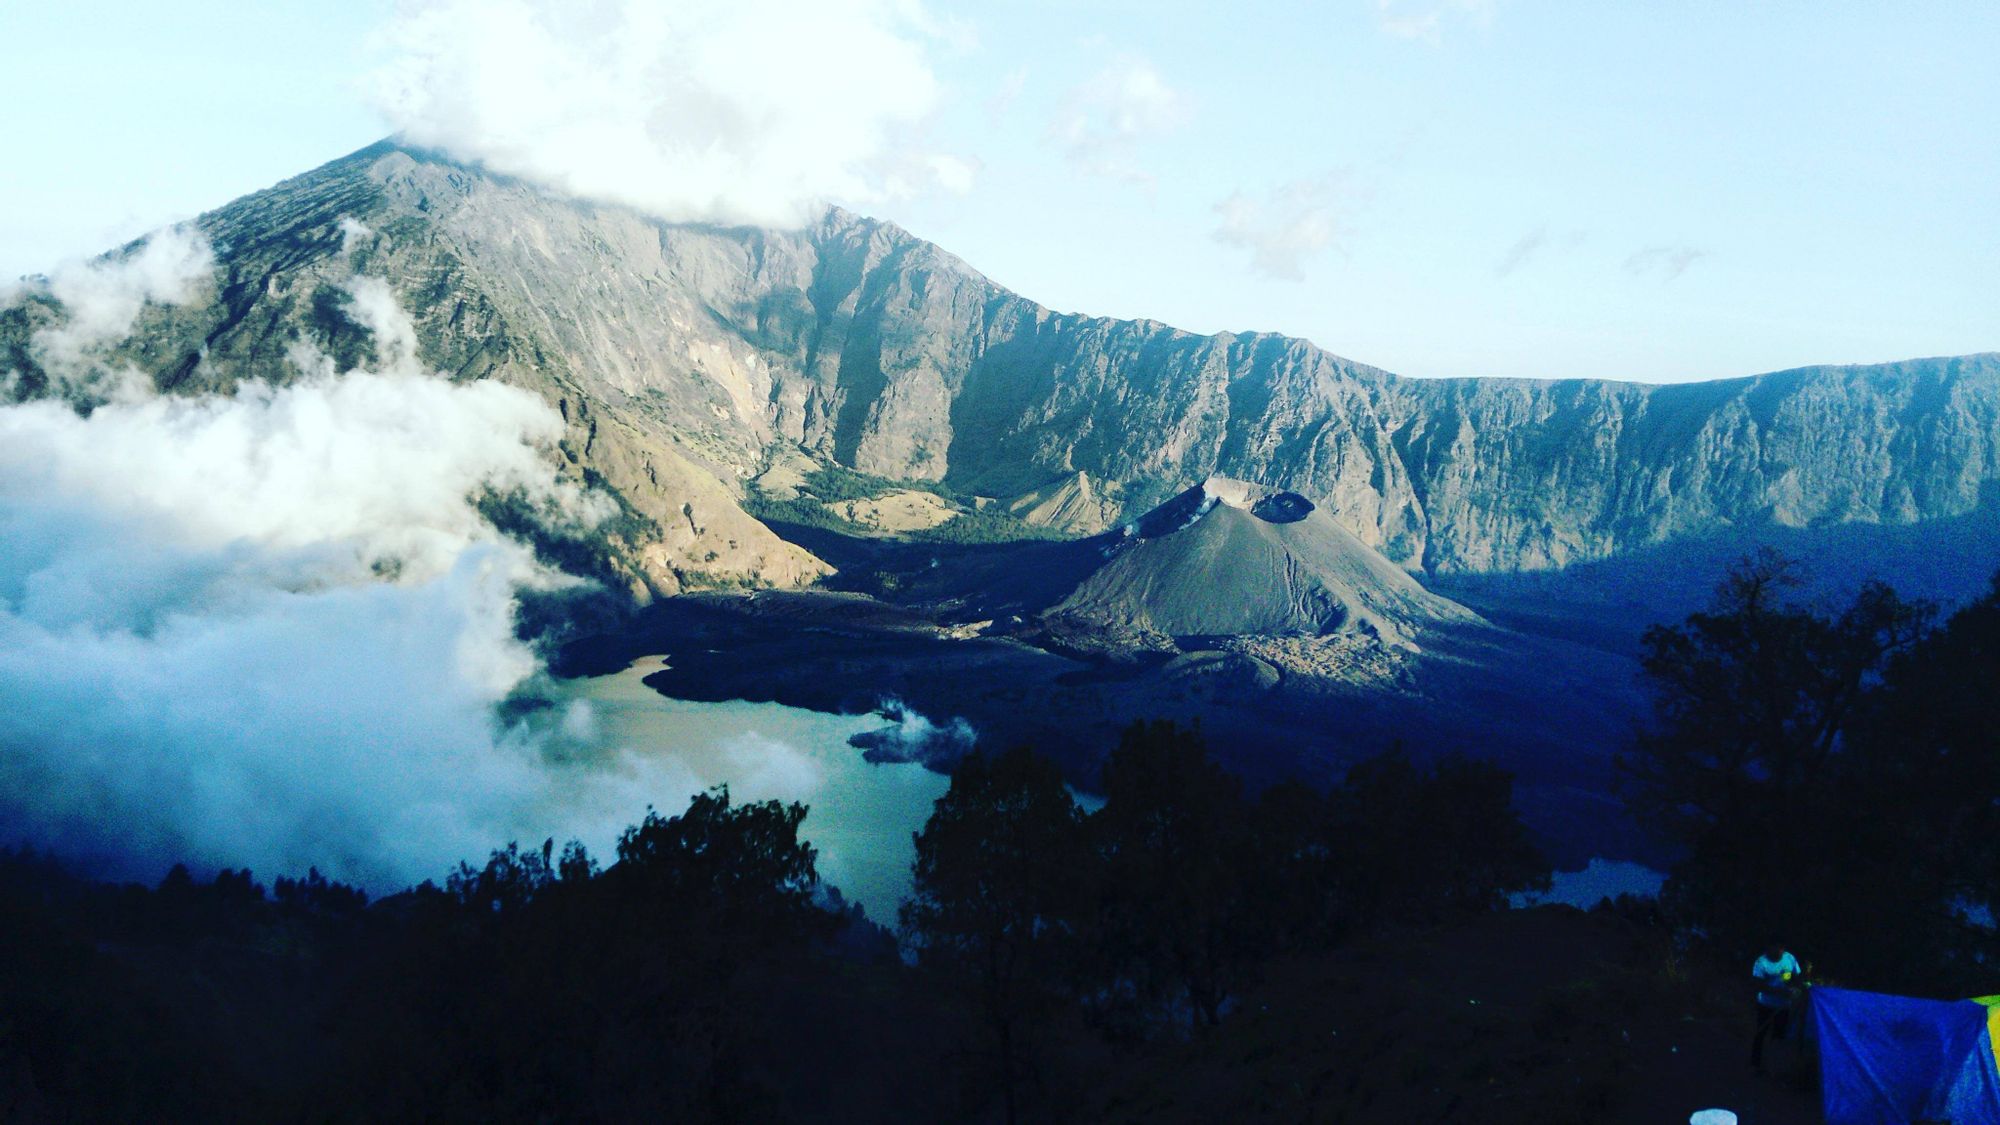 The volcanoes and landscapes seen while trekking on Mt. Rinjani, Indonesia